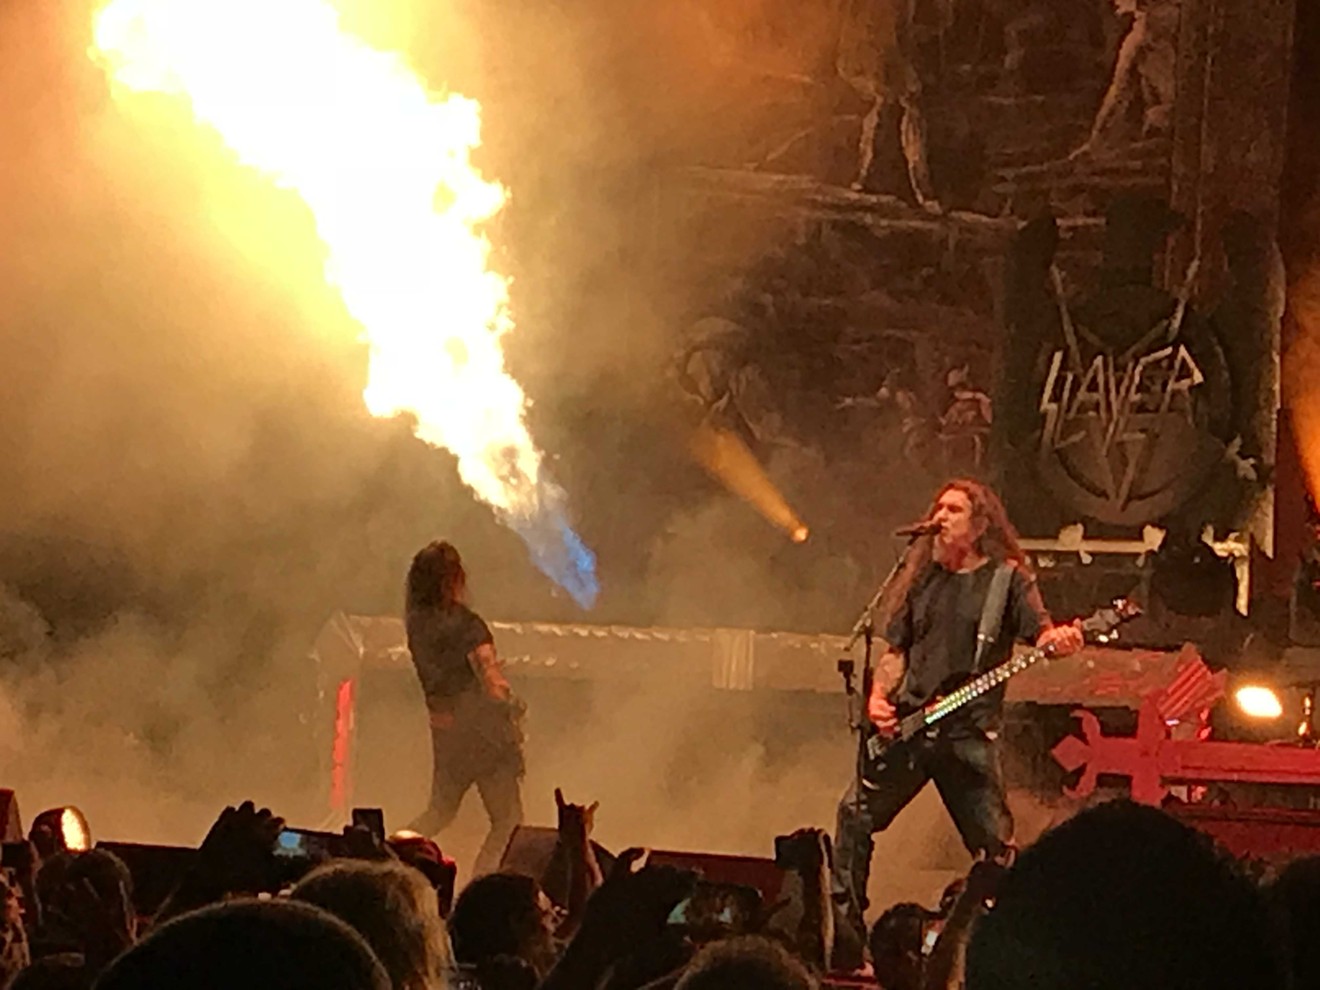 There was plenty of fire to go around while Slayer was on stage.